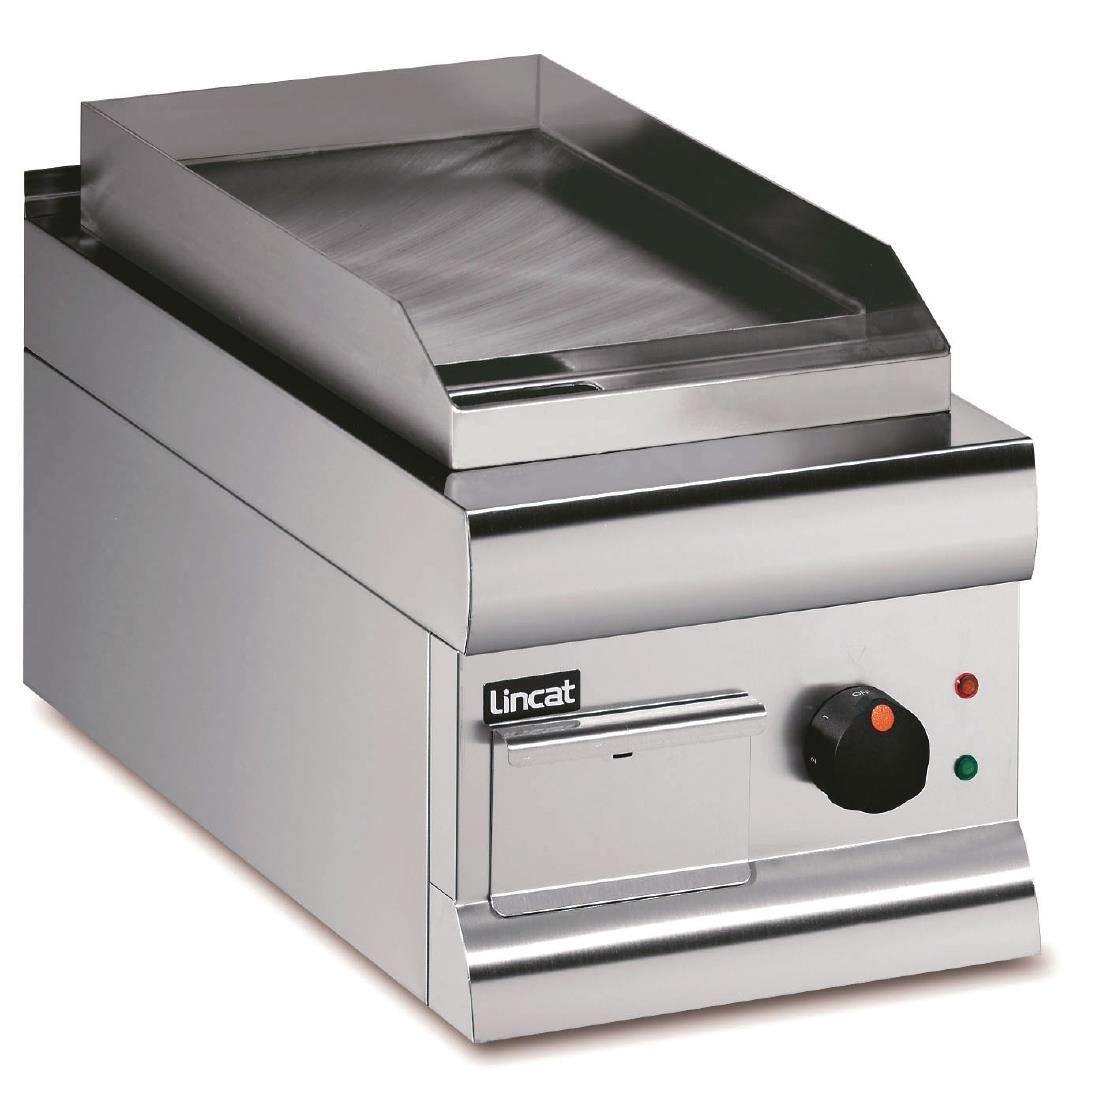 GS3/E - Lincat Silverlink 600 Electric Counter-top Griddle - Extra Power - W 300 mm - 2.5 kW CL675 JD Catering Equipment Solutions Ltd